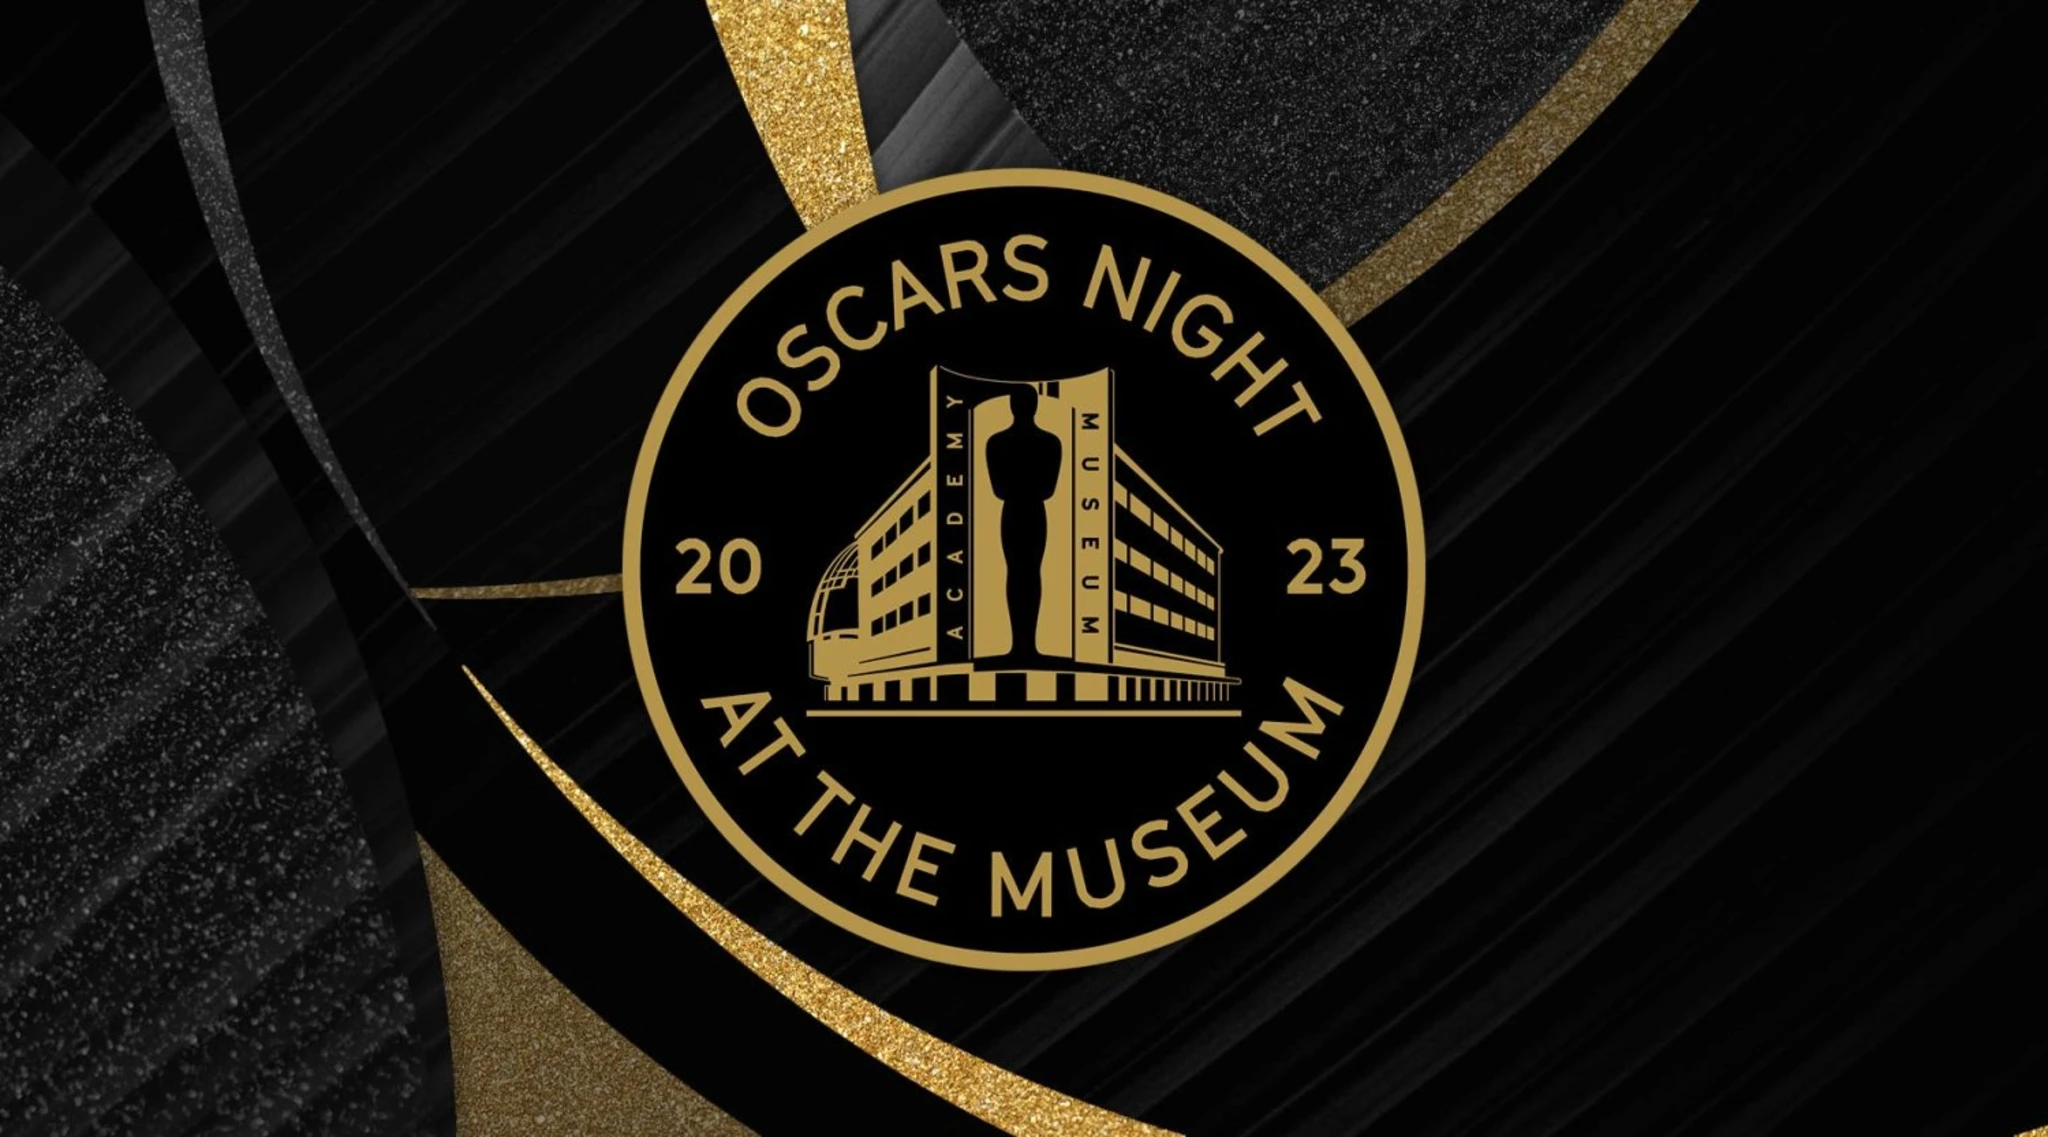 Celebrate the 95th Oscars at the Academy Museum of Motion Pictures